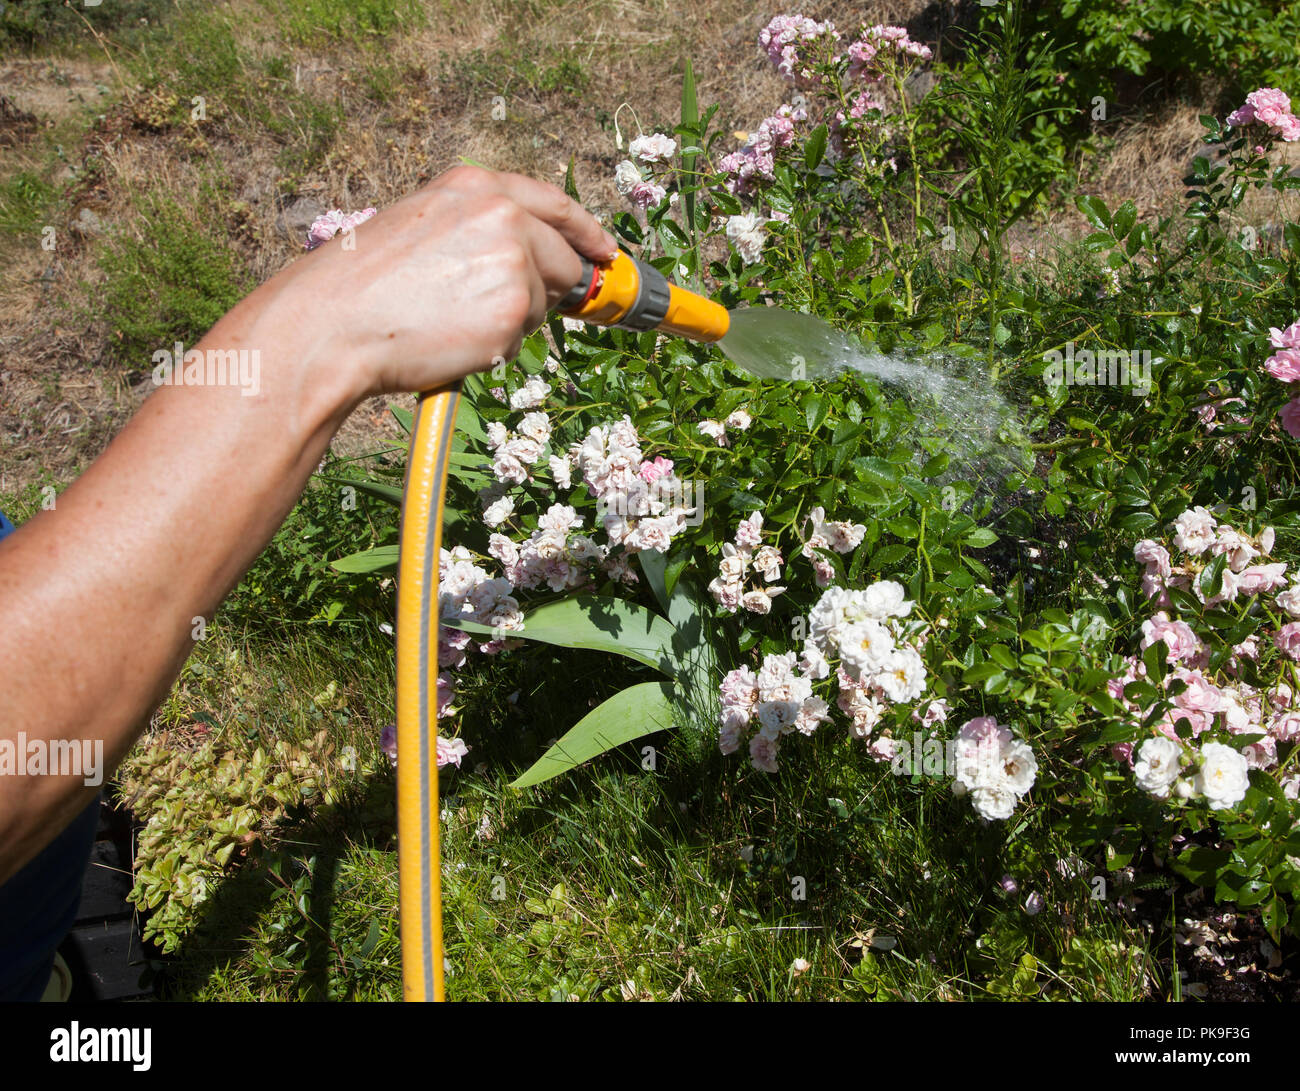 IRRIGATION with hose in the garden 2018 Stock Photo